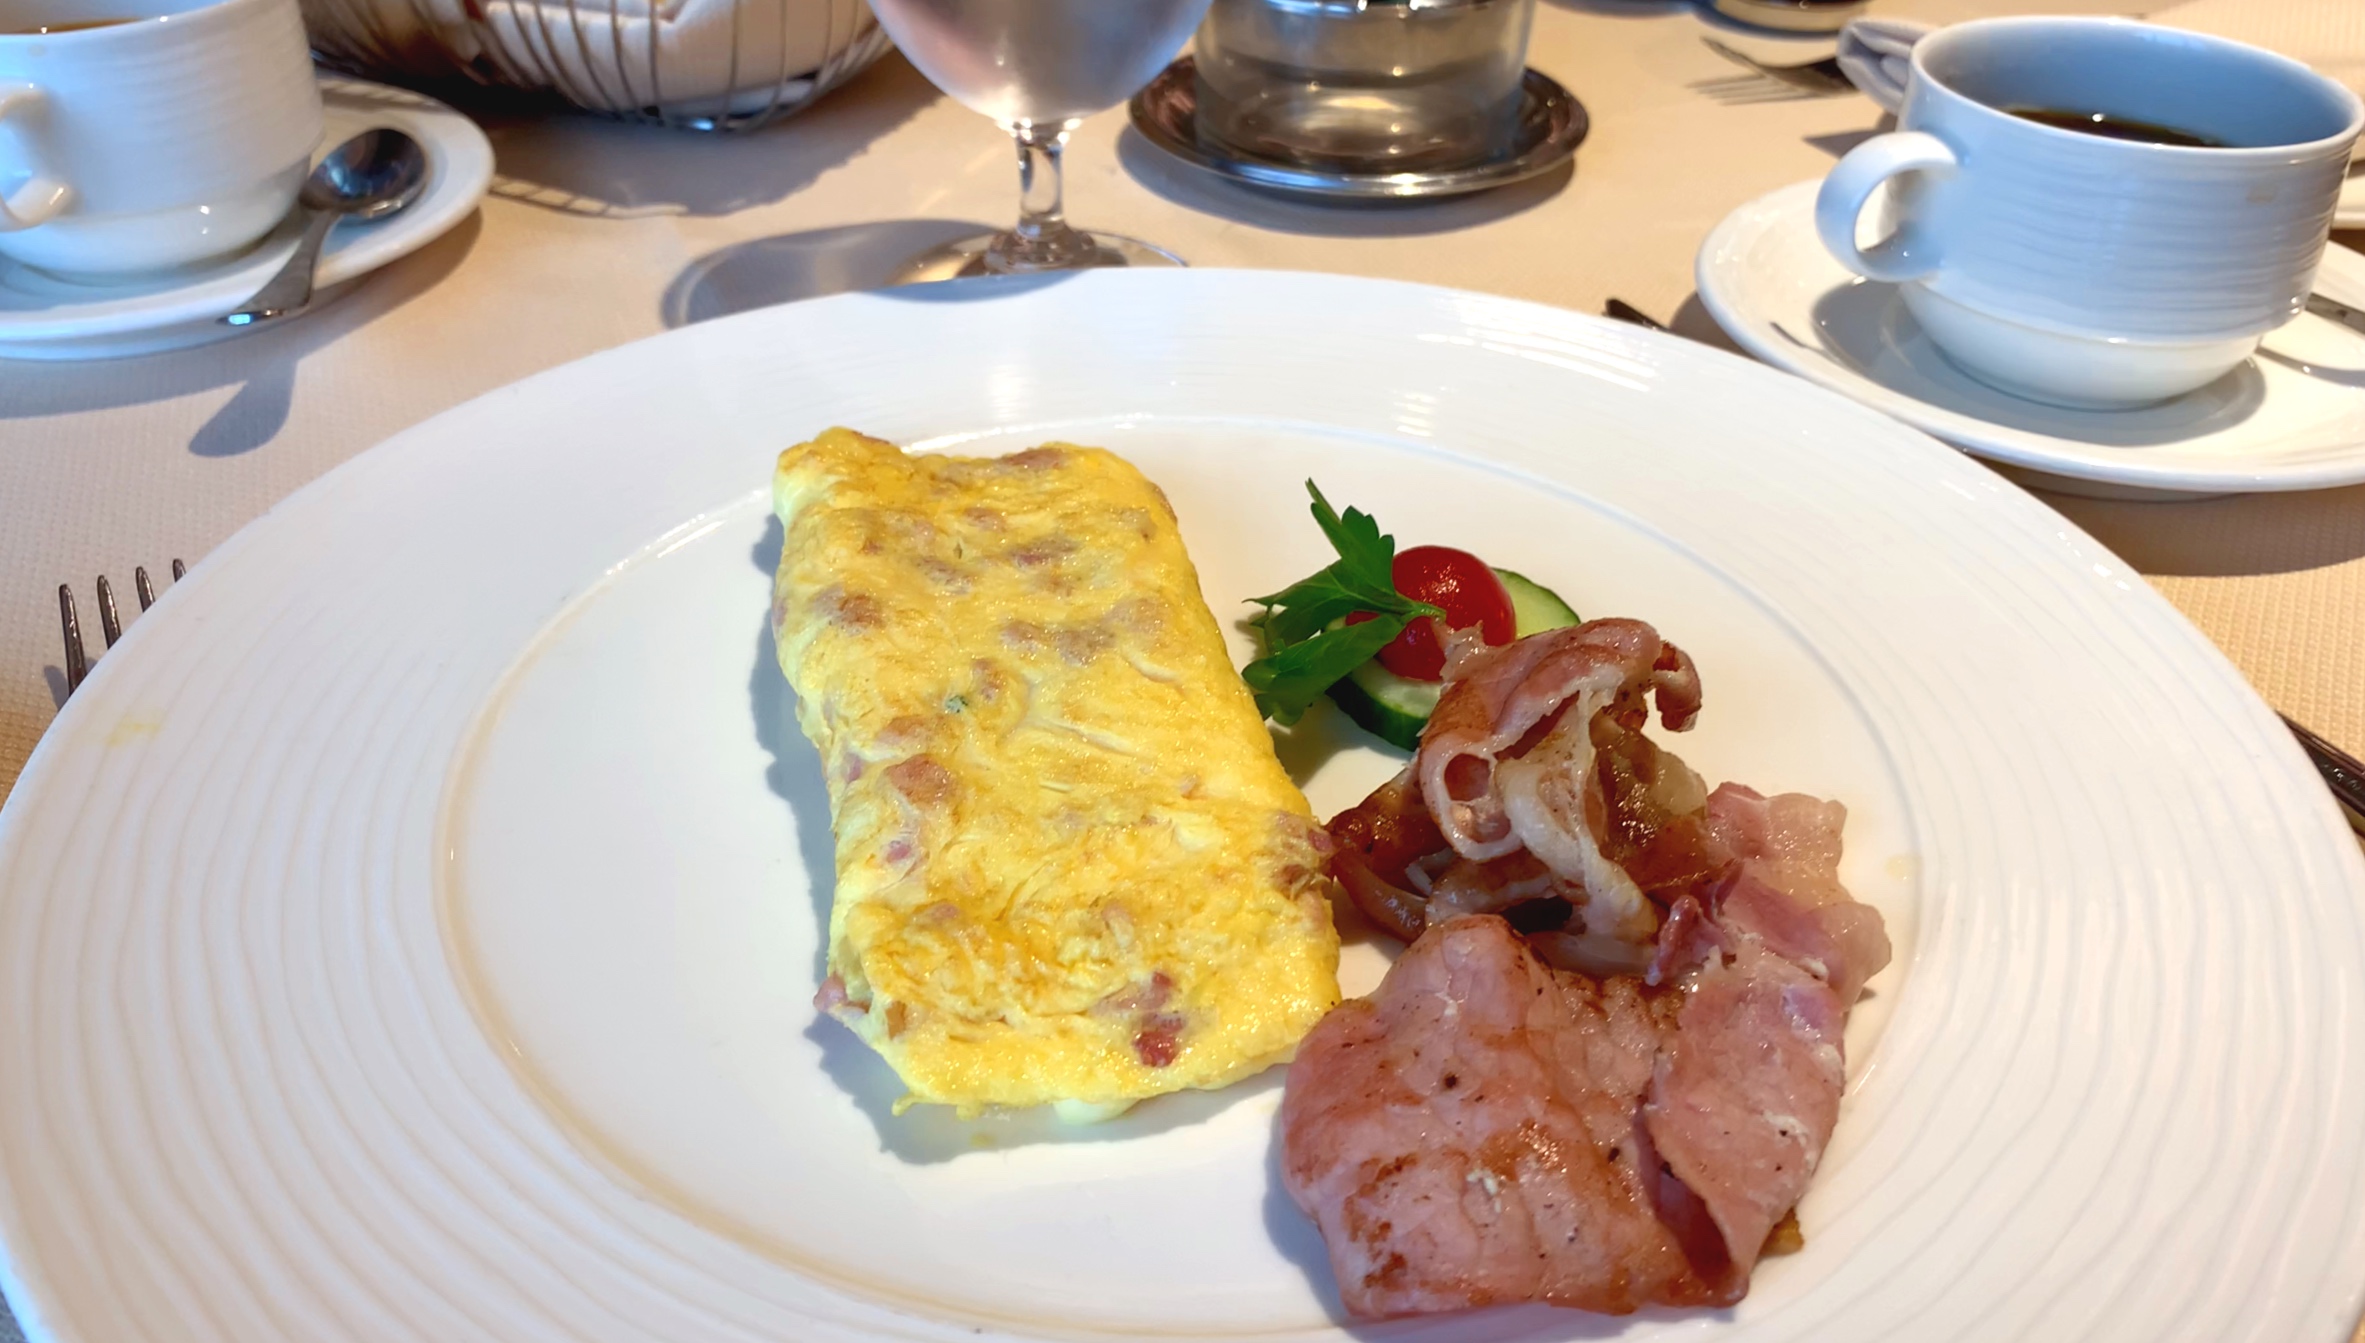 Atlantide omelet and bacon.